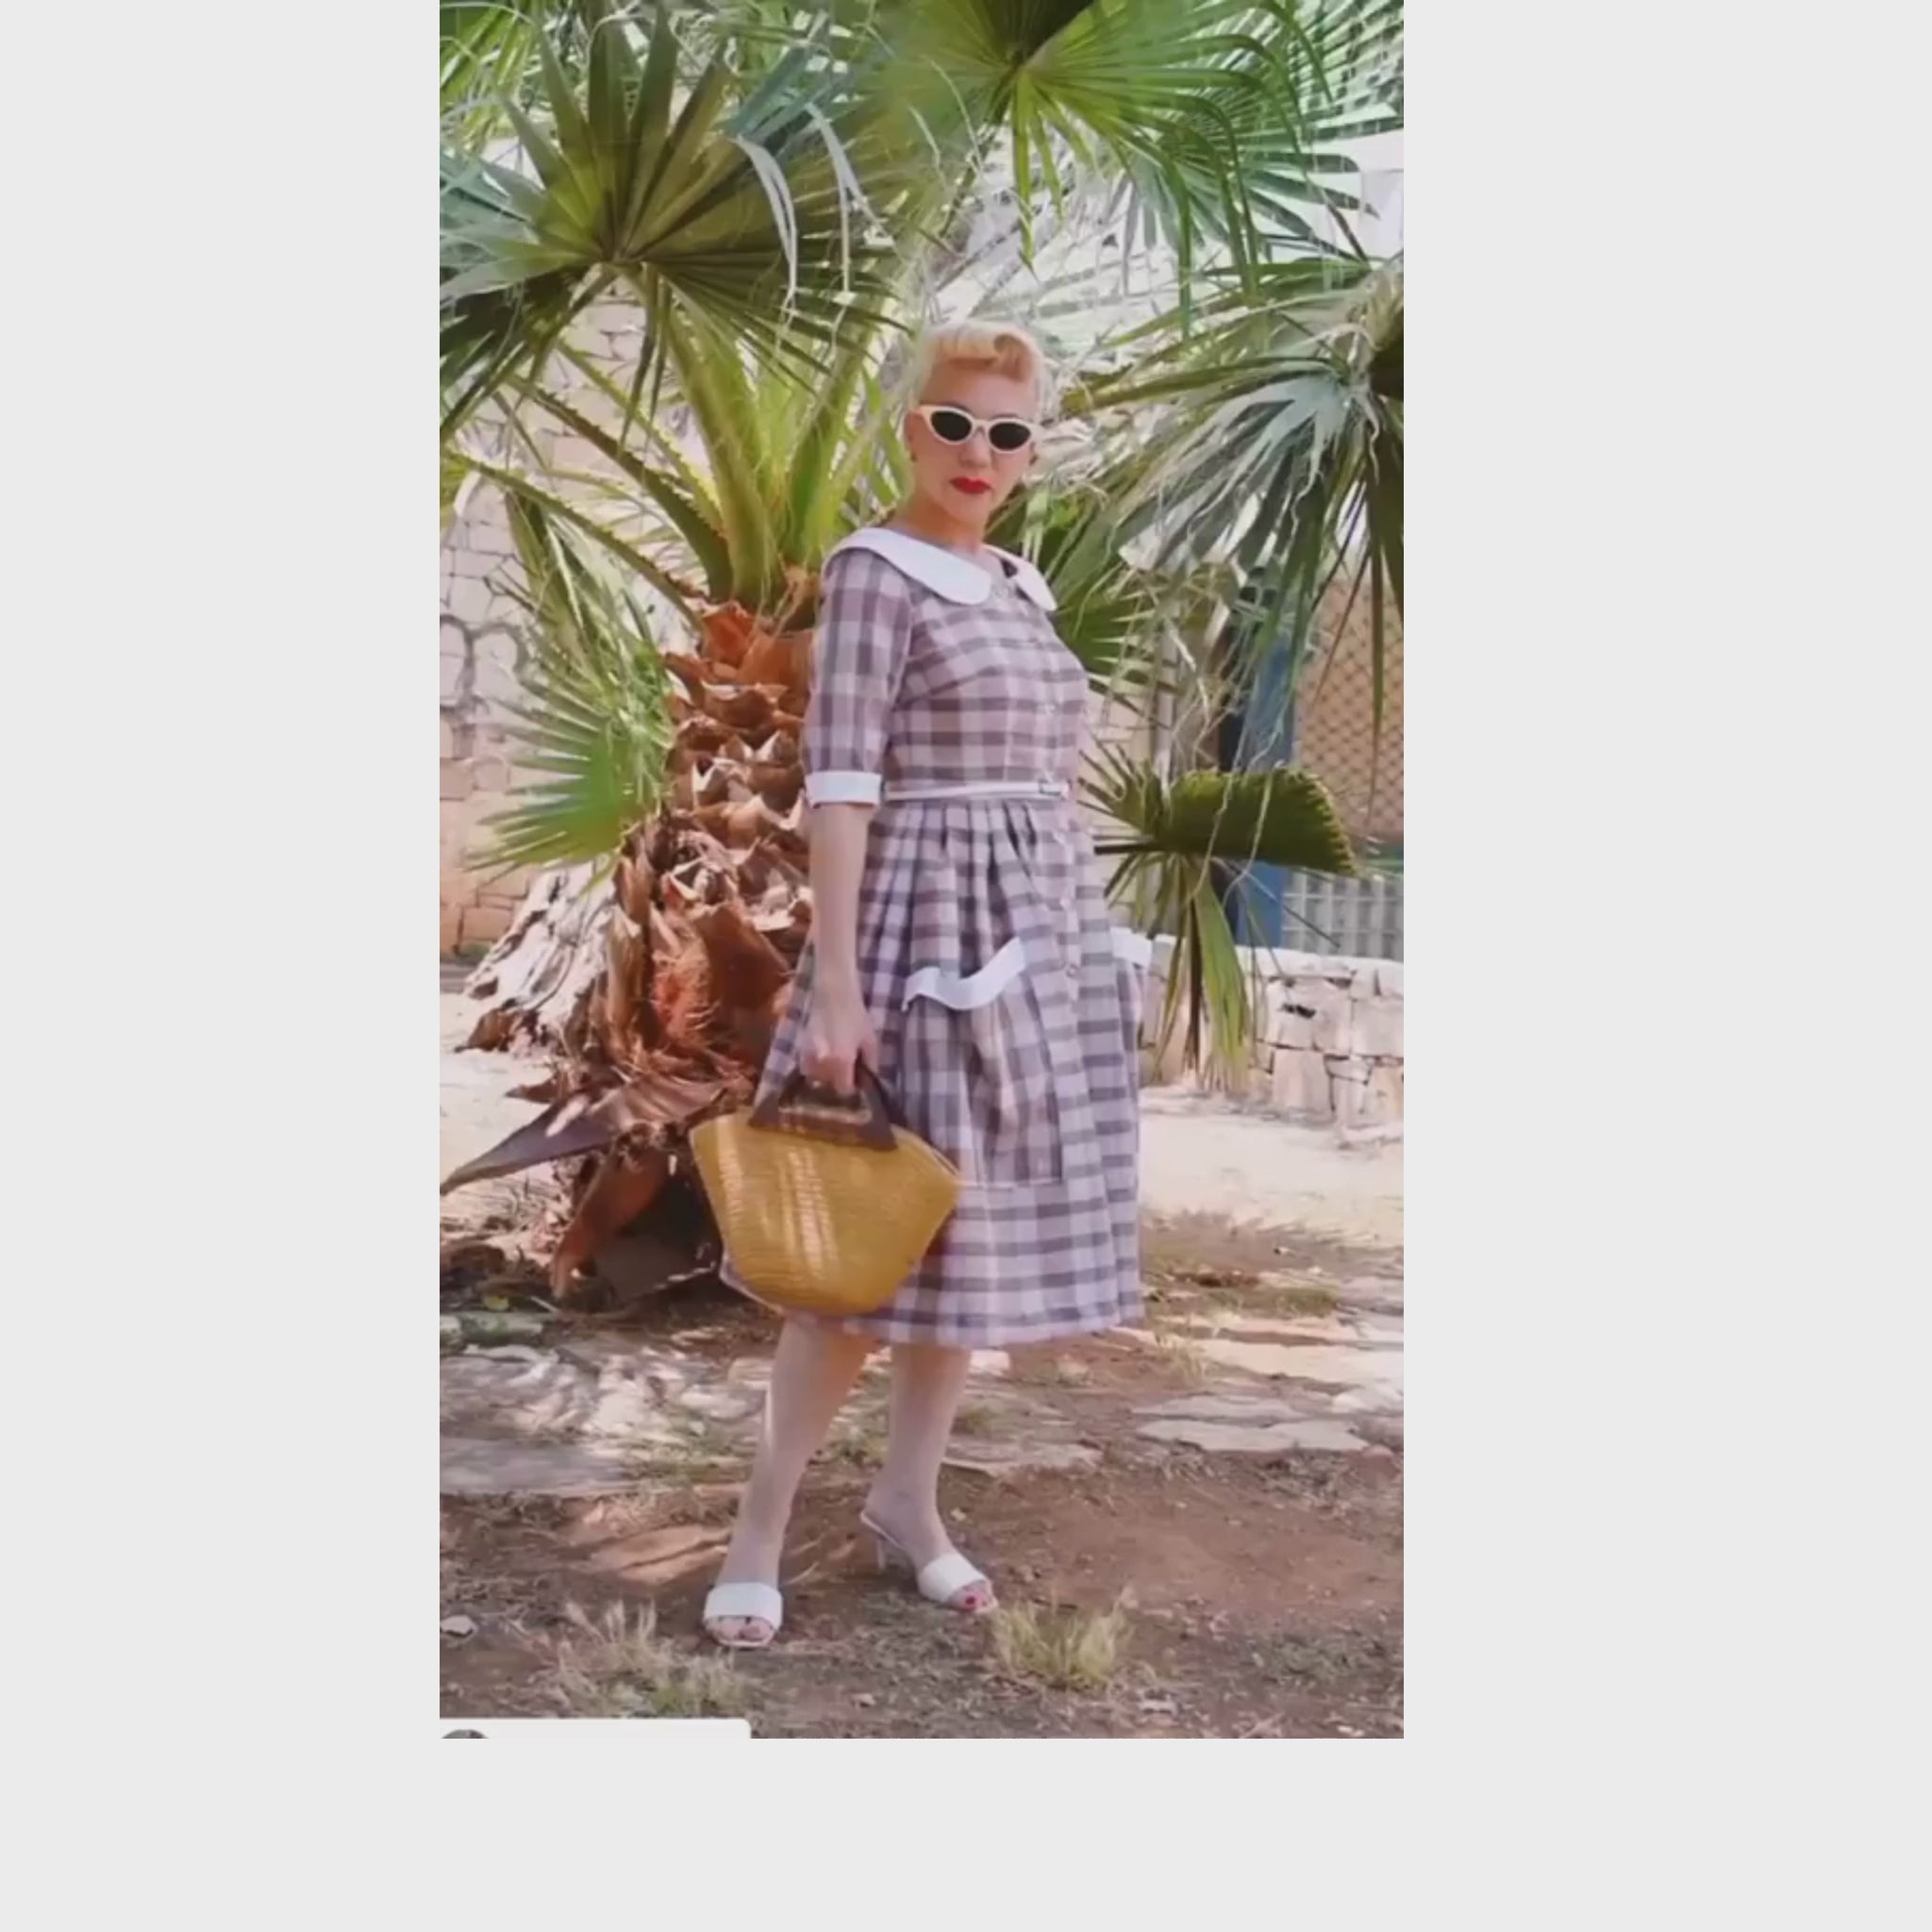 Blonde haired woman wearing a gingham brigette style dress made up from a sewing pattern.